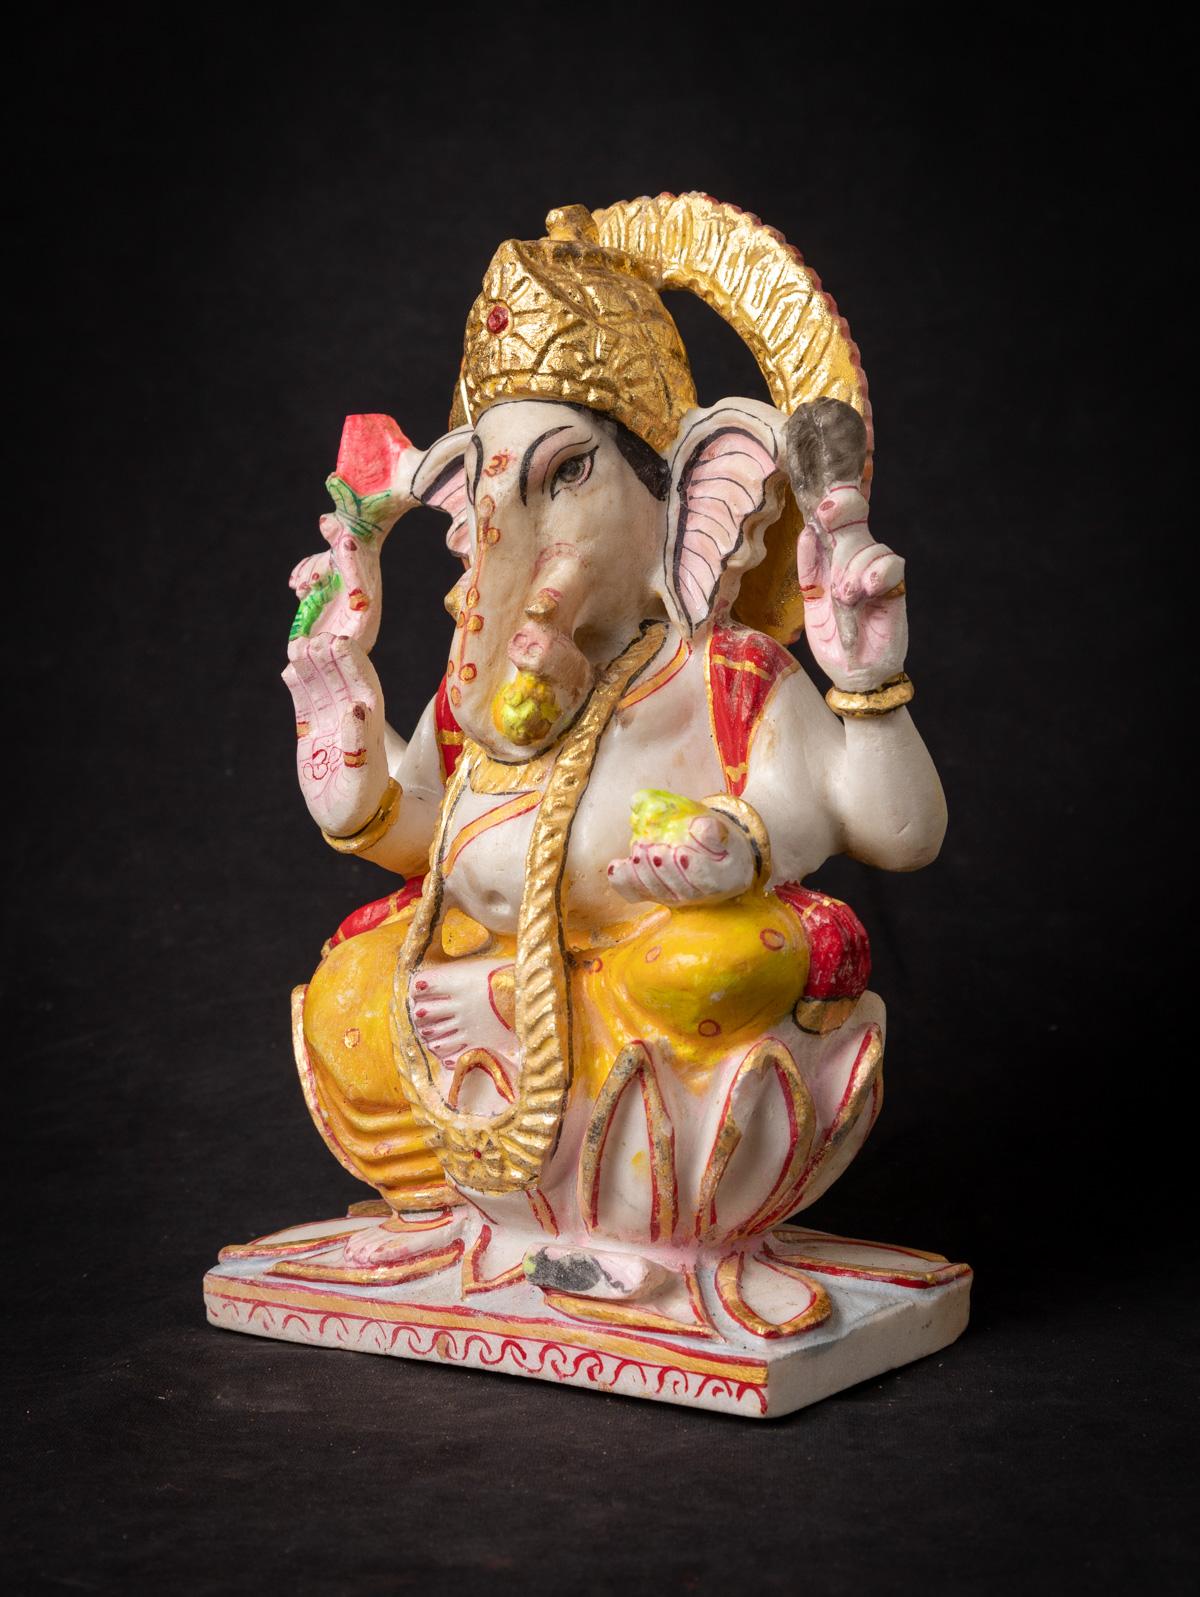 This Indian marble Ganesha statue is a magnificent work of art that embodies the essence of the elephant-headed deity, Lord Ganesha. Crafted from marble, it stands 28.5 cm tall, with dimensions of 17.8 cm in width and 9 cm in depth. Despite being